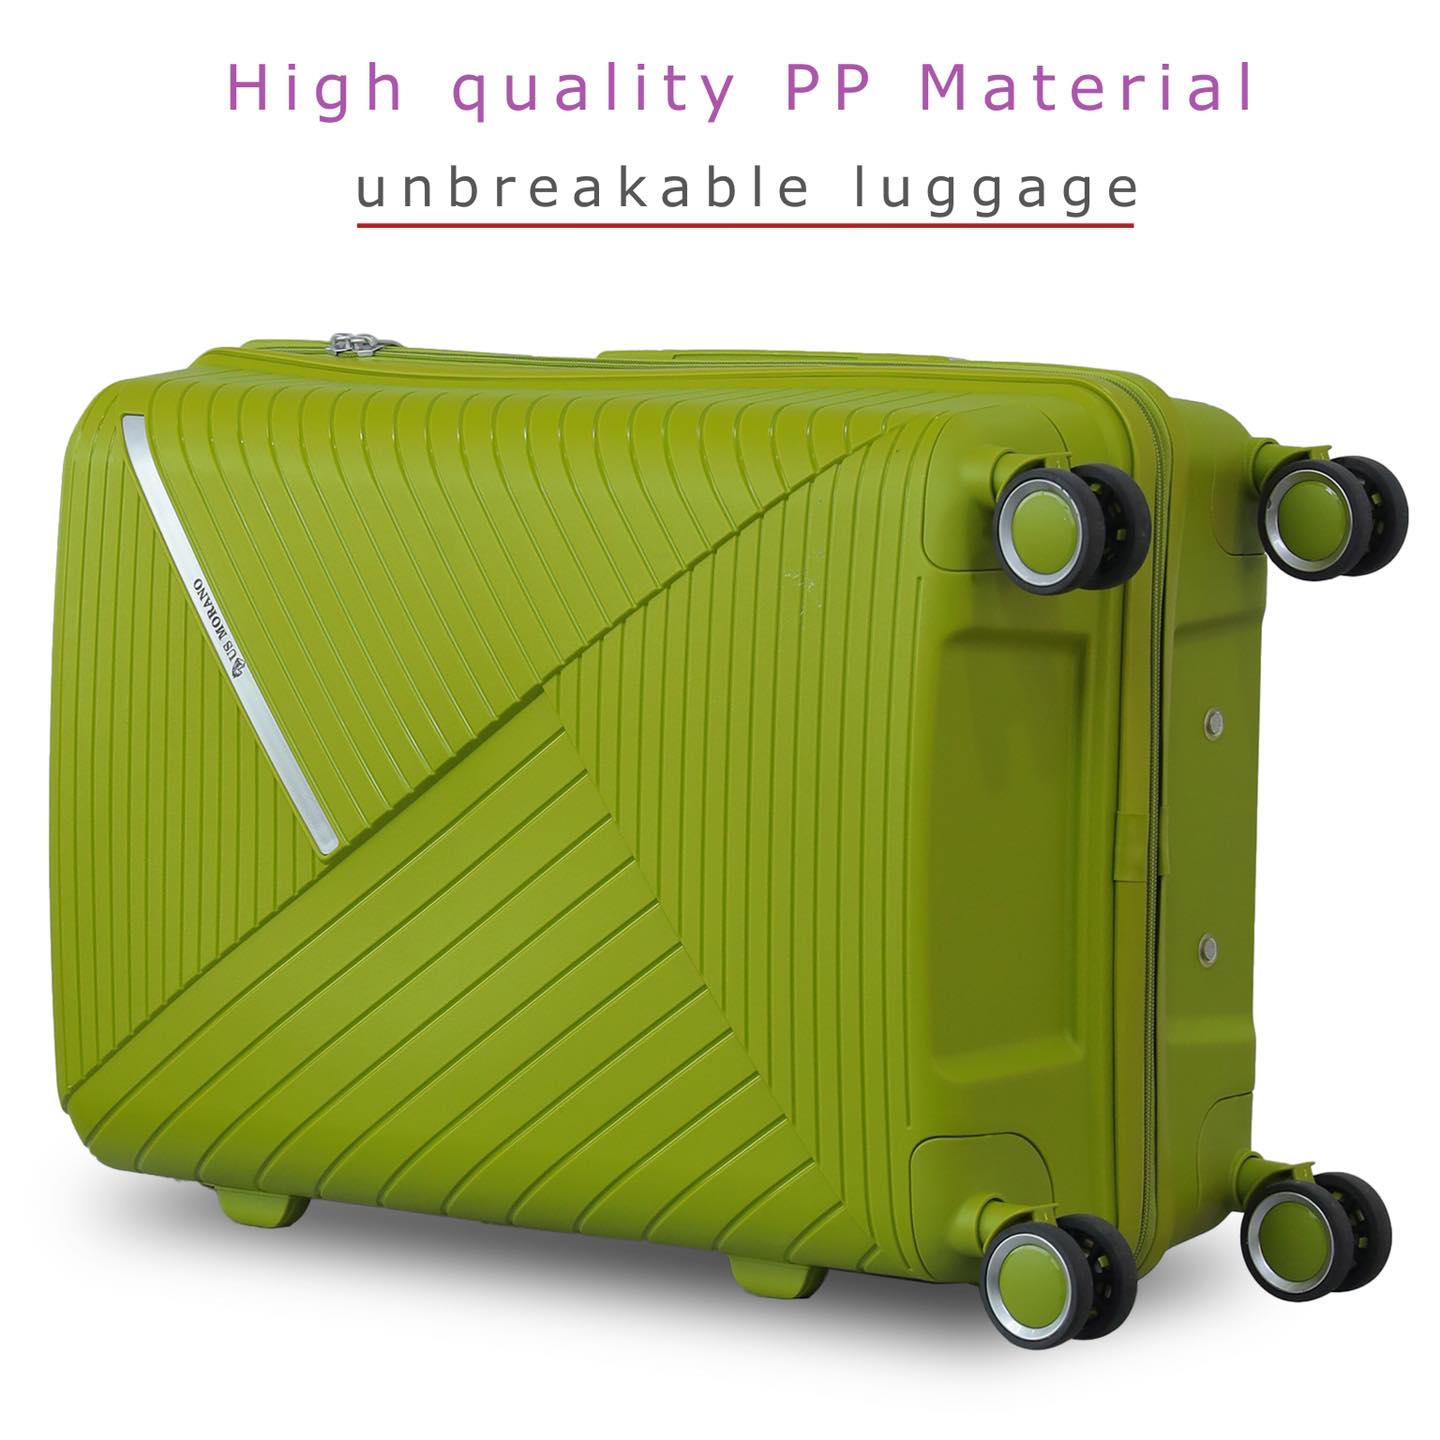 3 Piece Full Set 20" 24" 28 Inches Green Colour Advanced PP Luggage lightweight Hard Case Trolley Bag With Double Spinner Wheel Zaappy.com